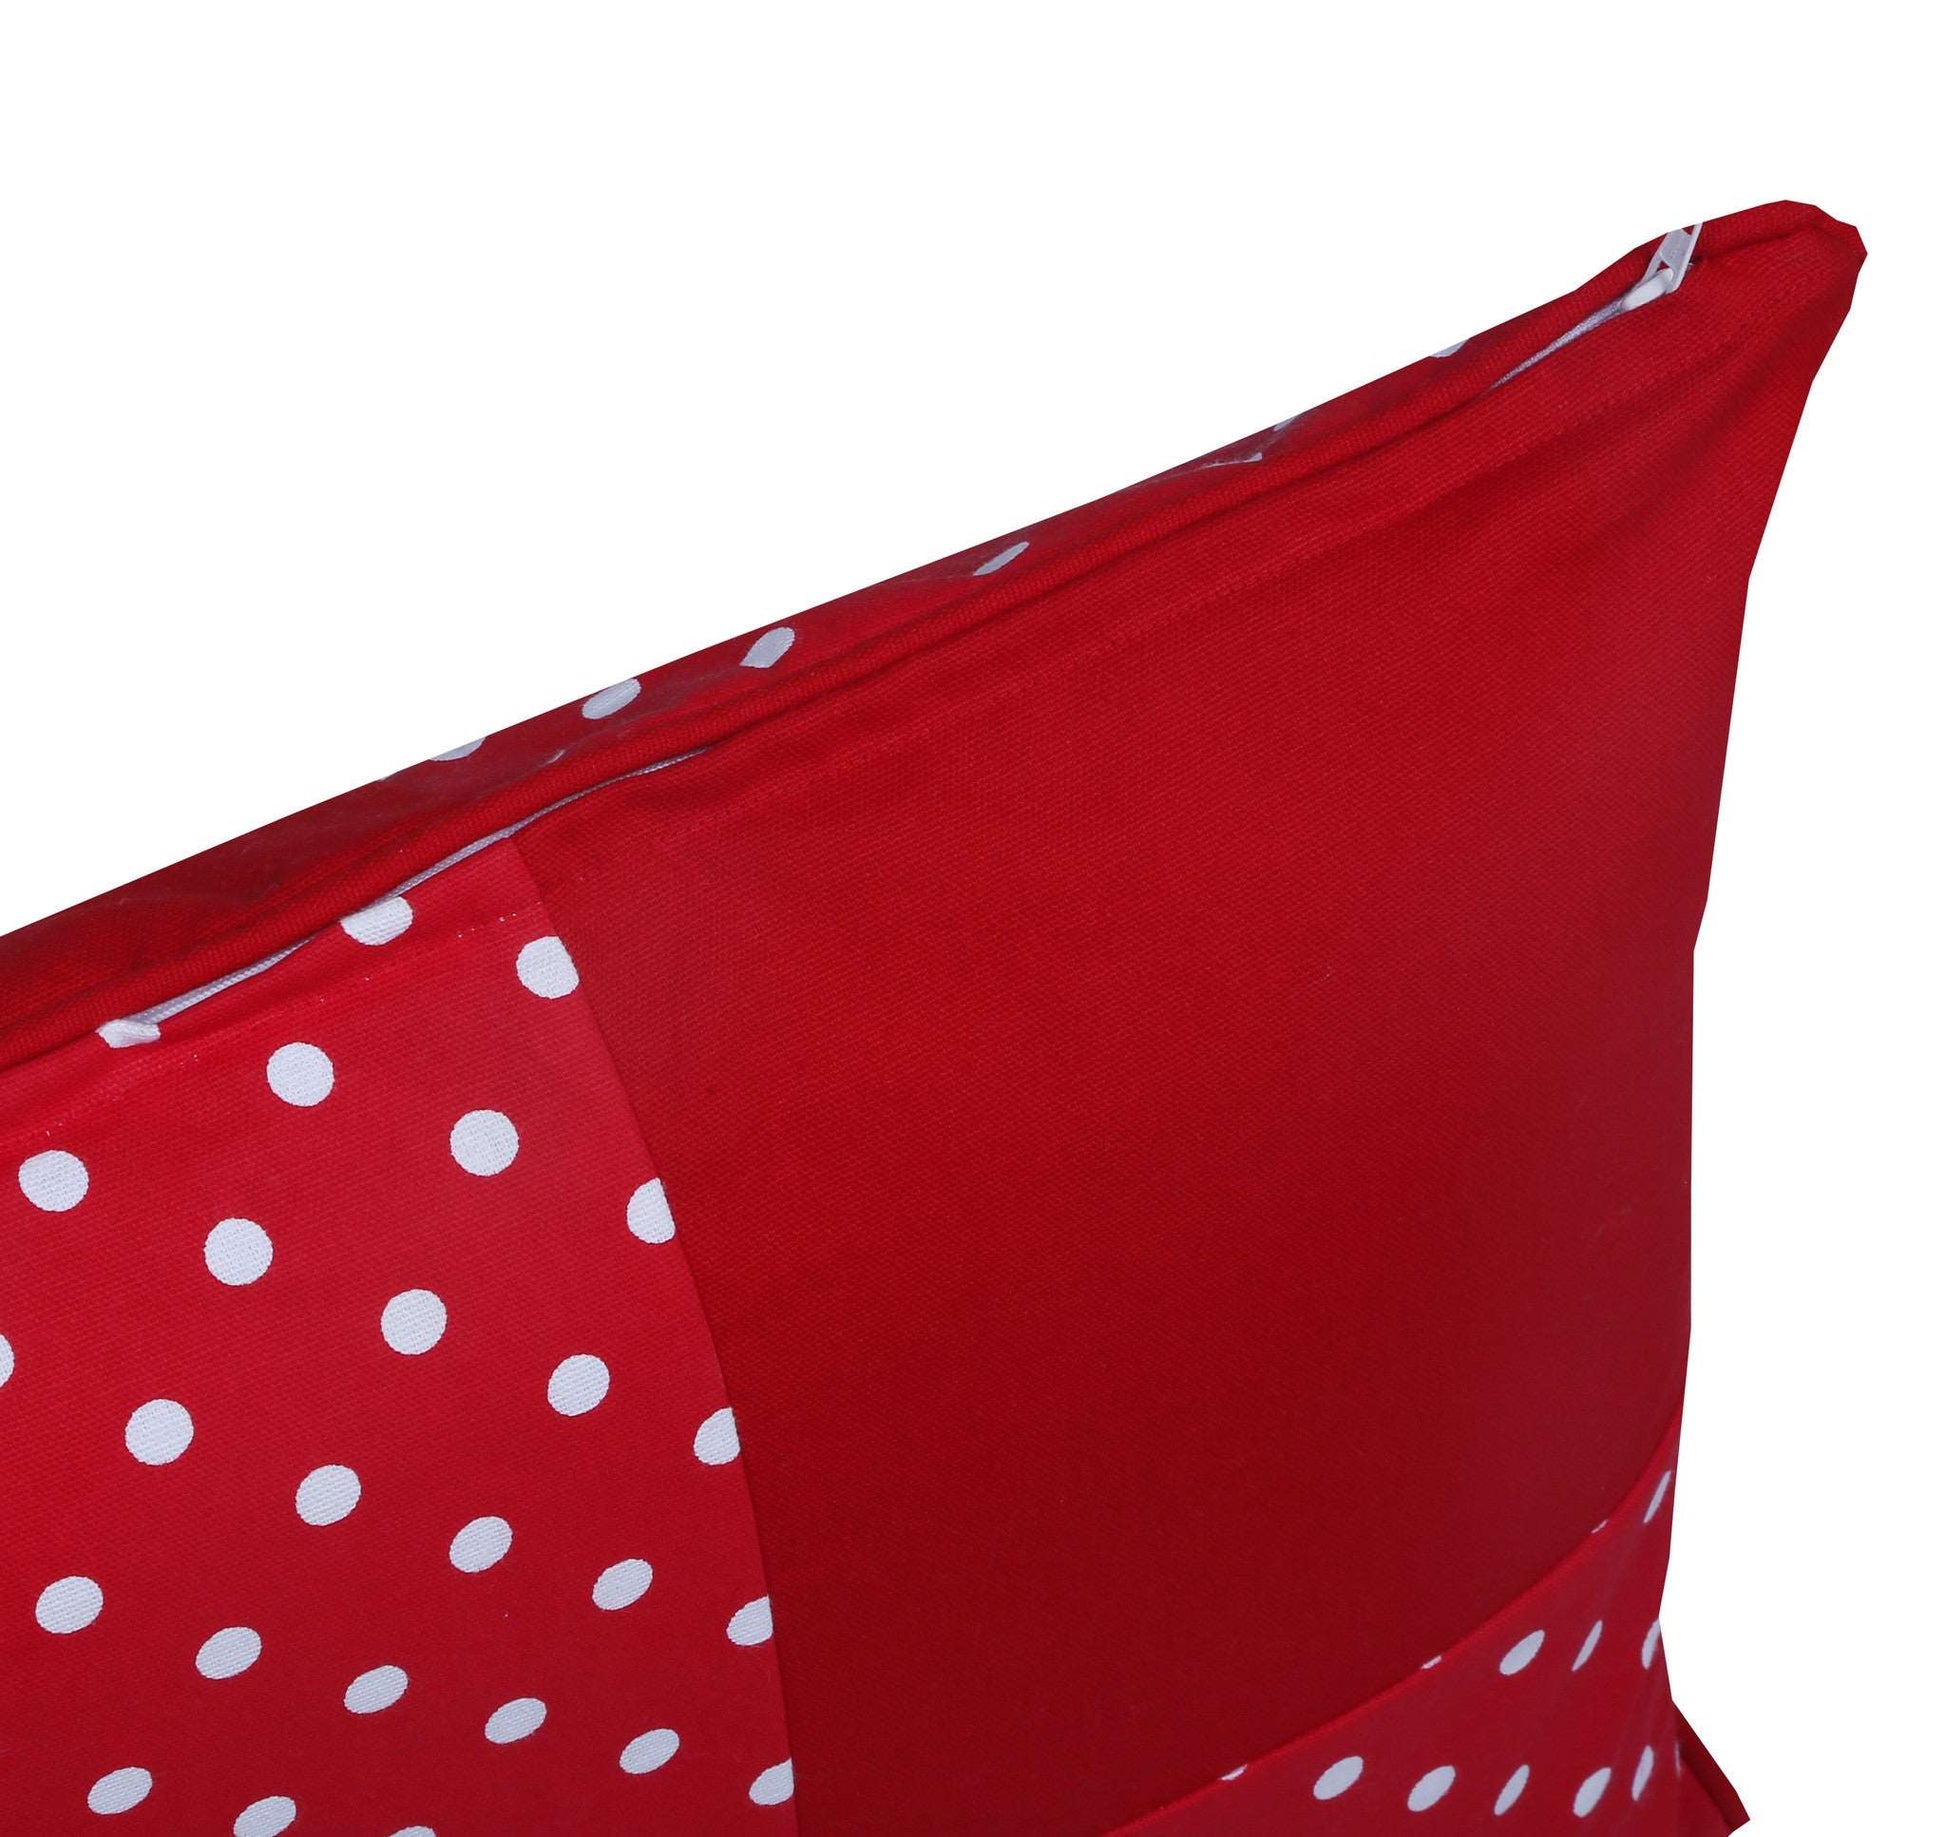 Cushion Cover - Polka Dot Red Joint